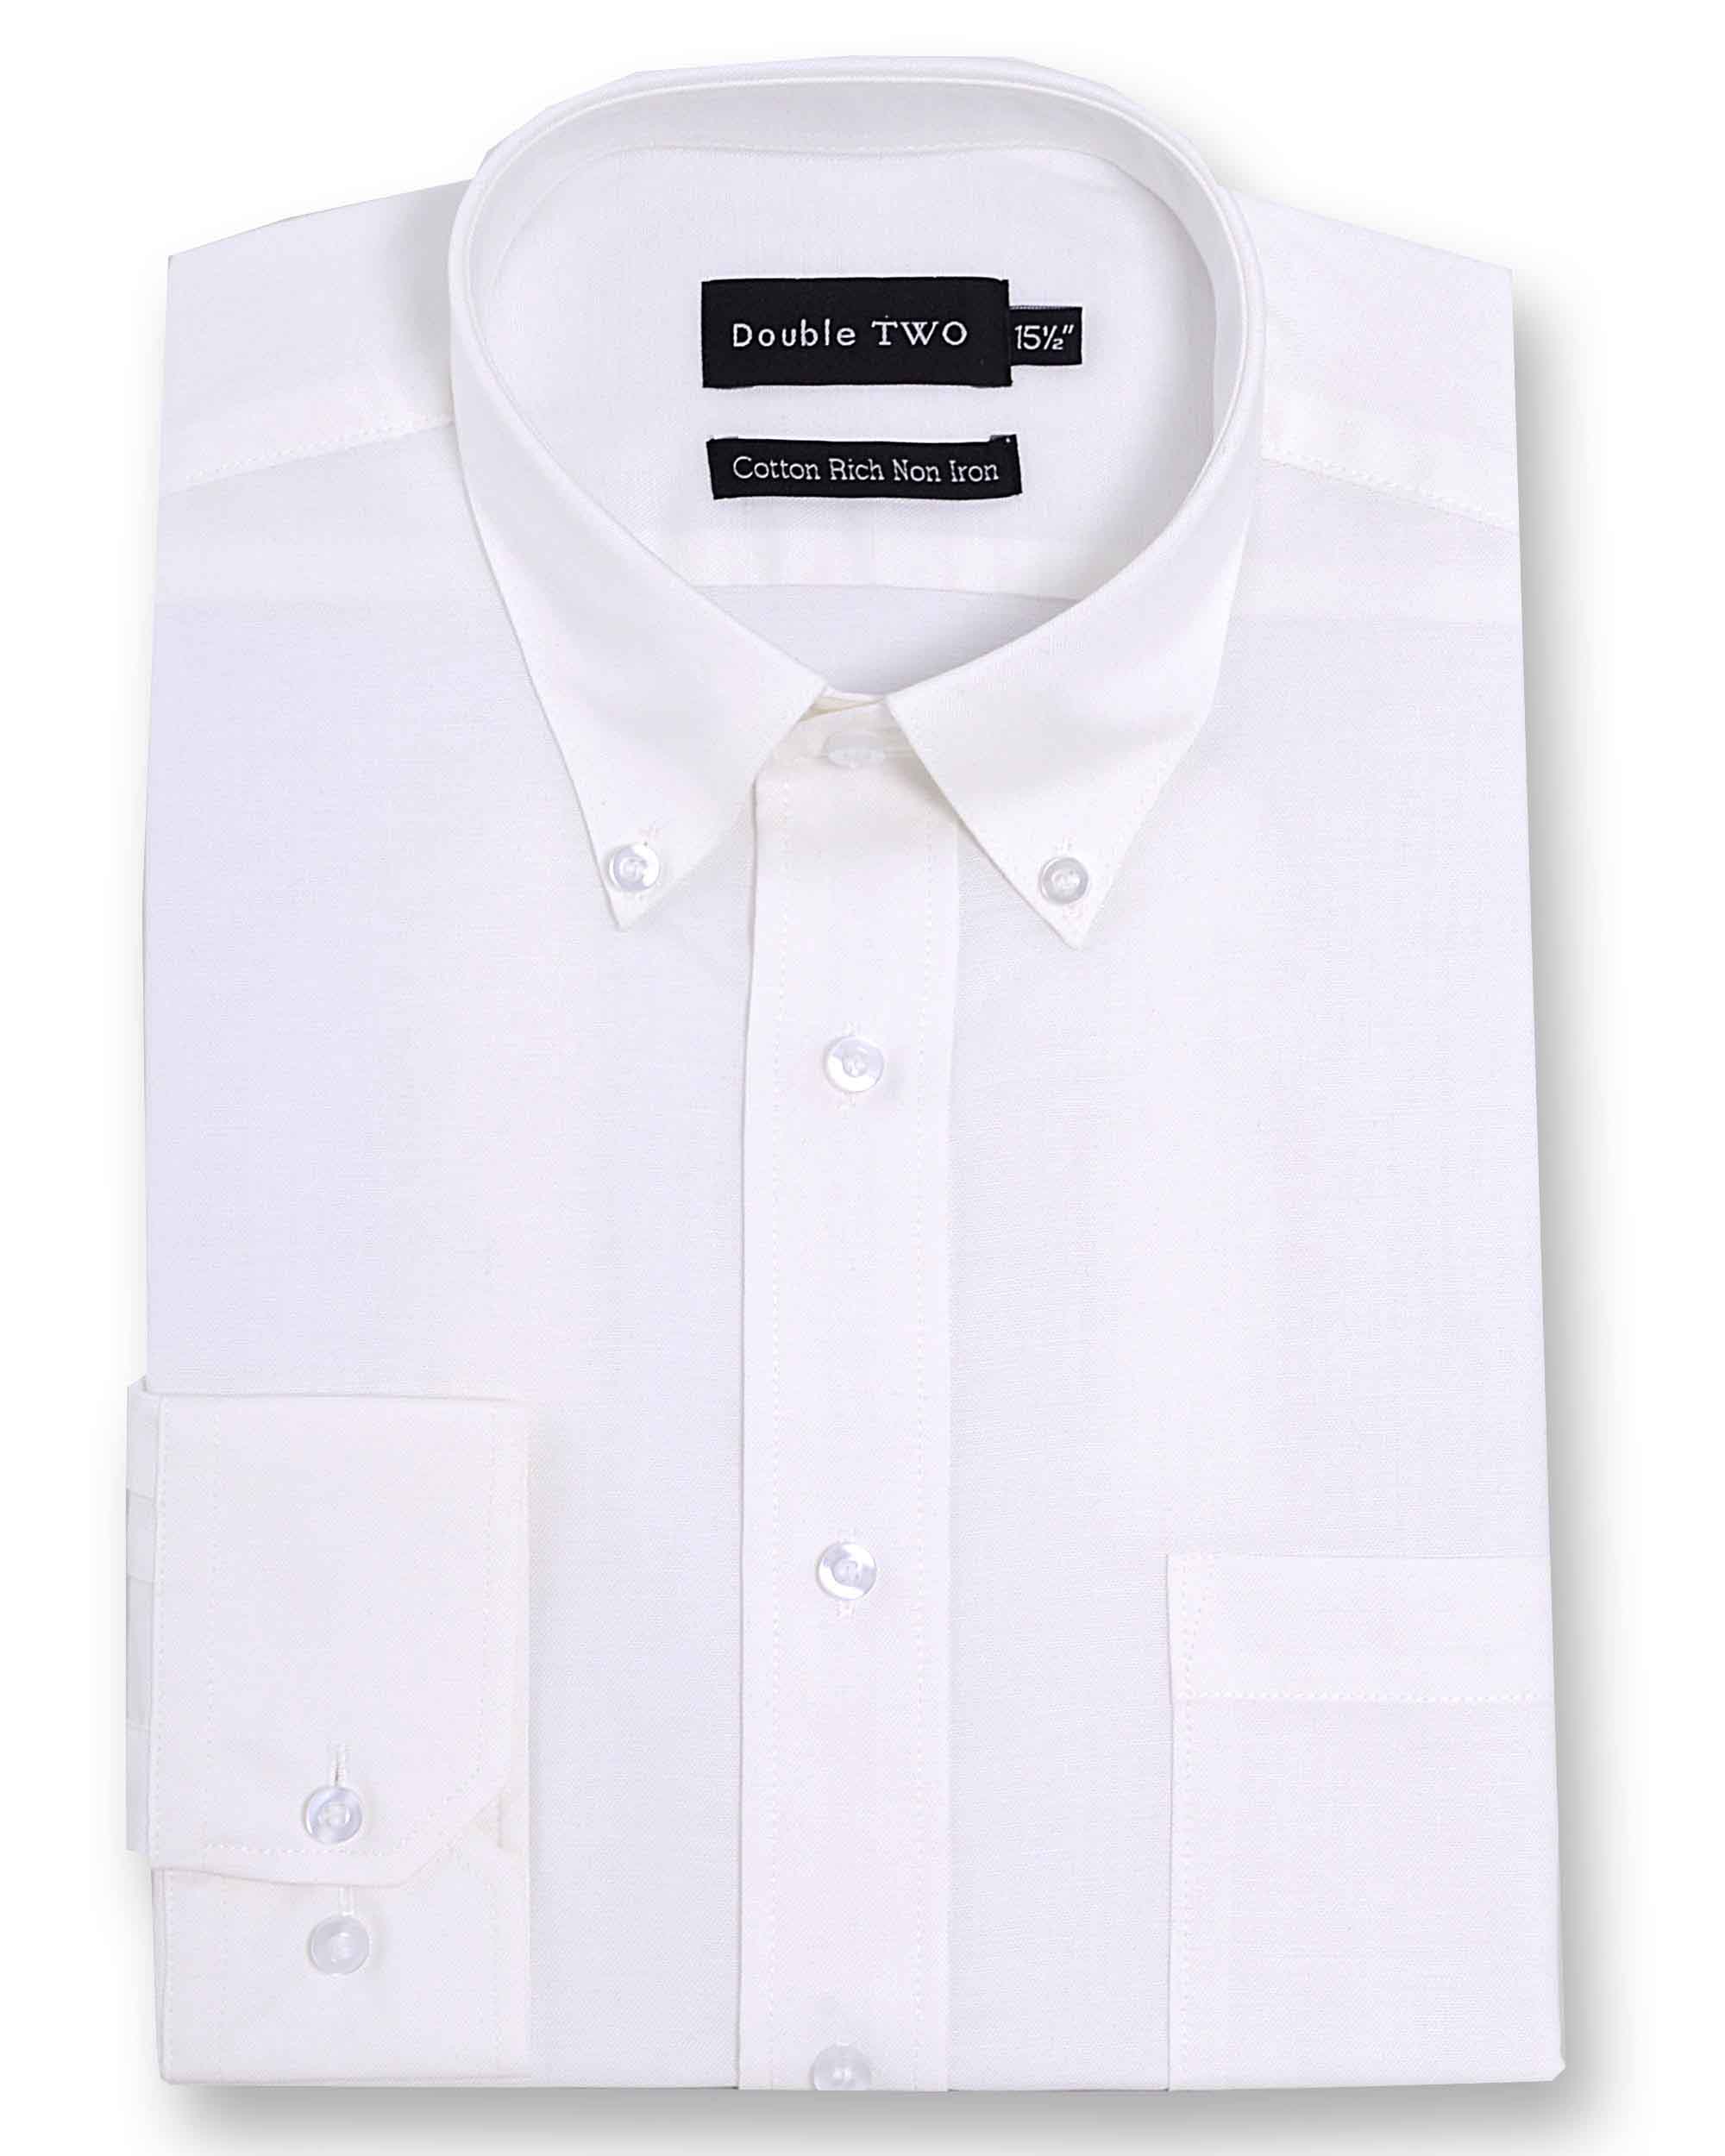 Men’s Double TWO Long Sleeve Oxford Shirt